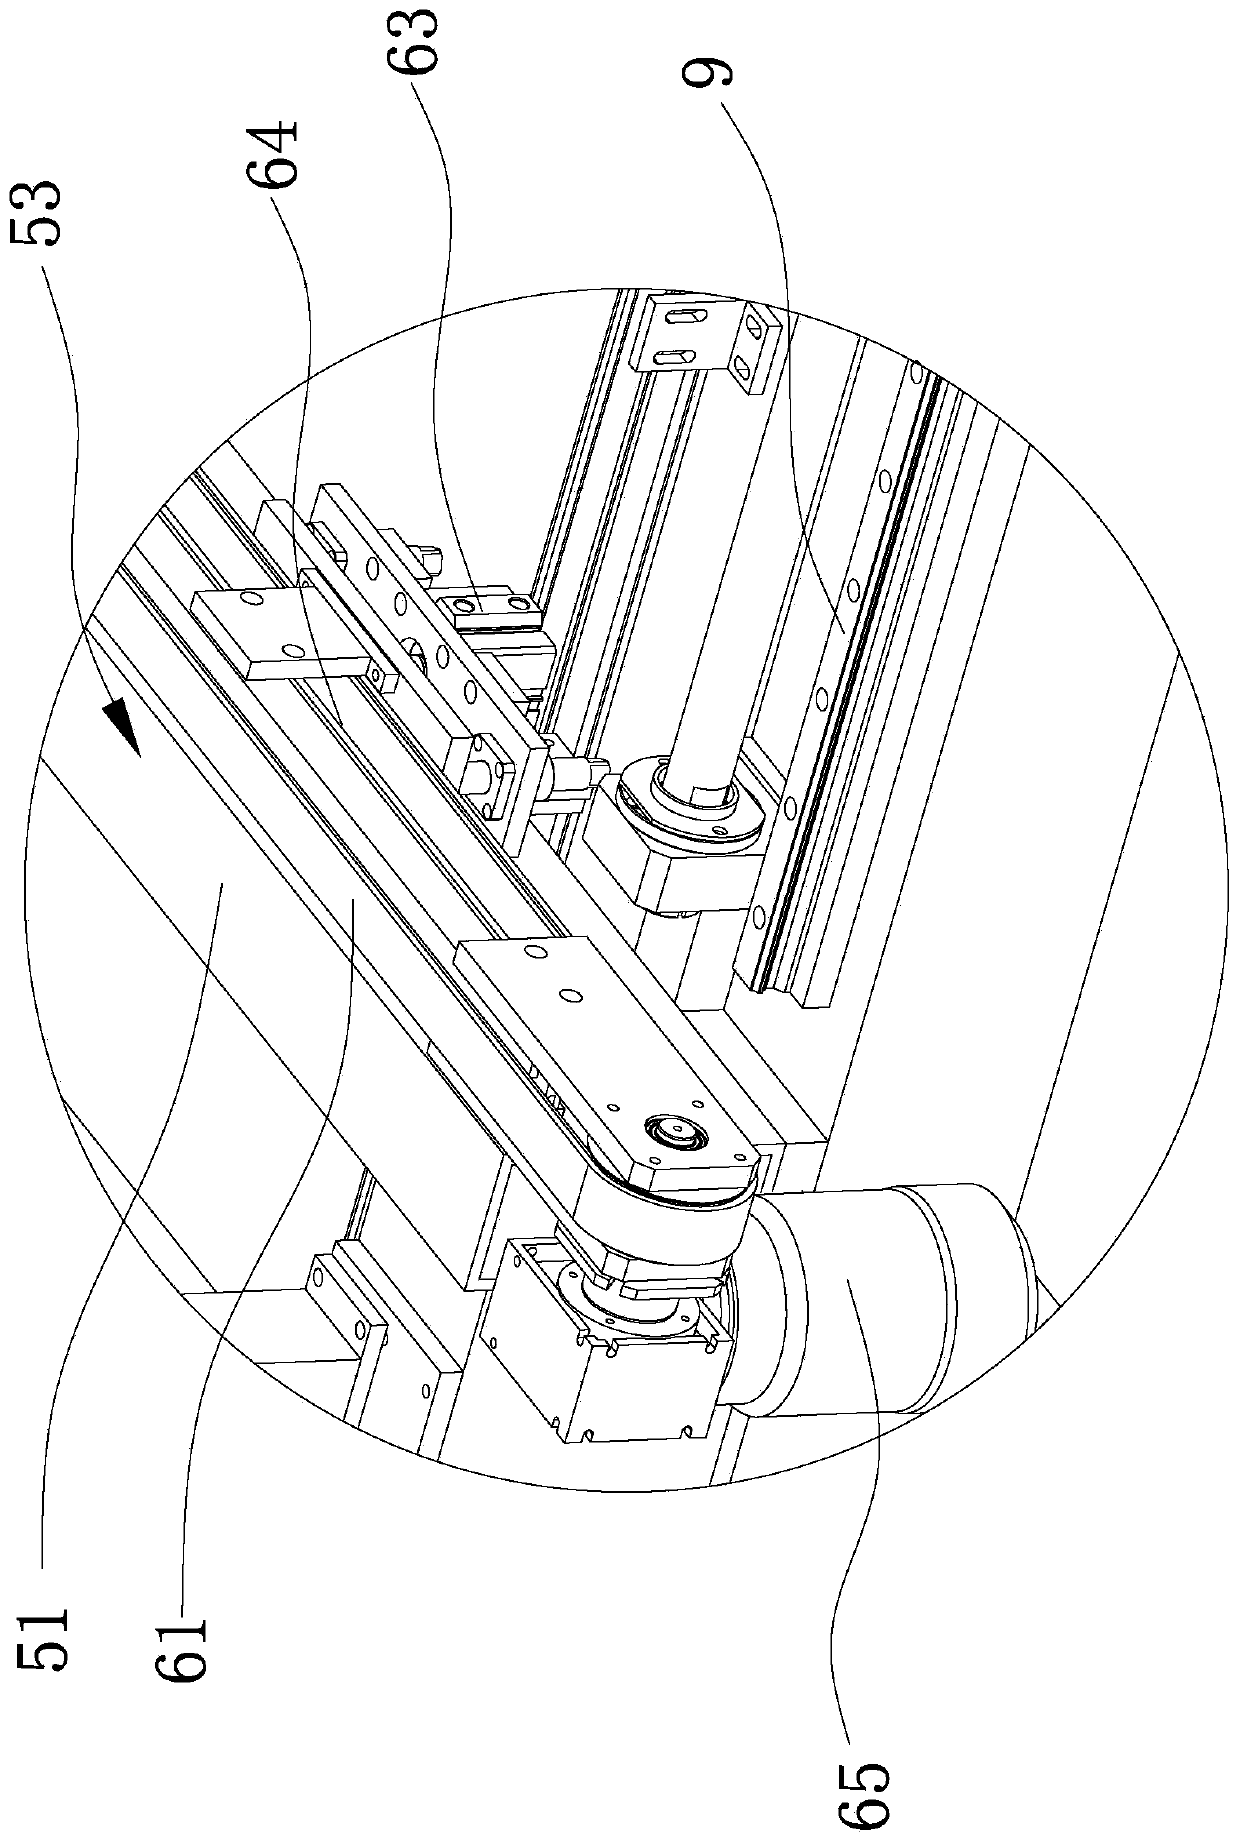 Double-end rip sawing device